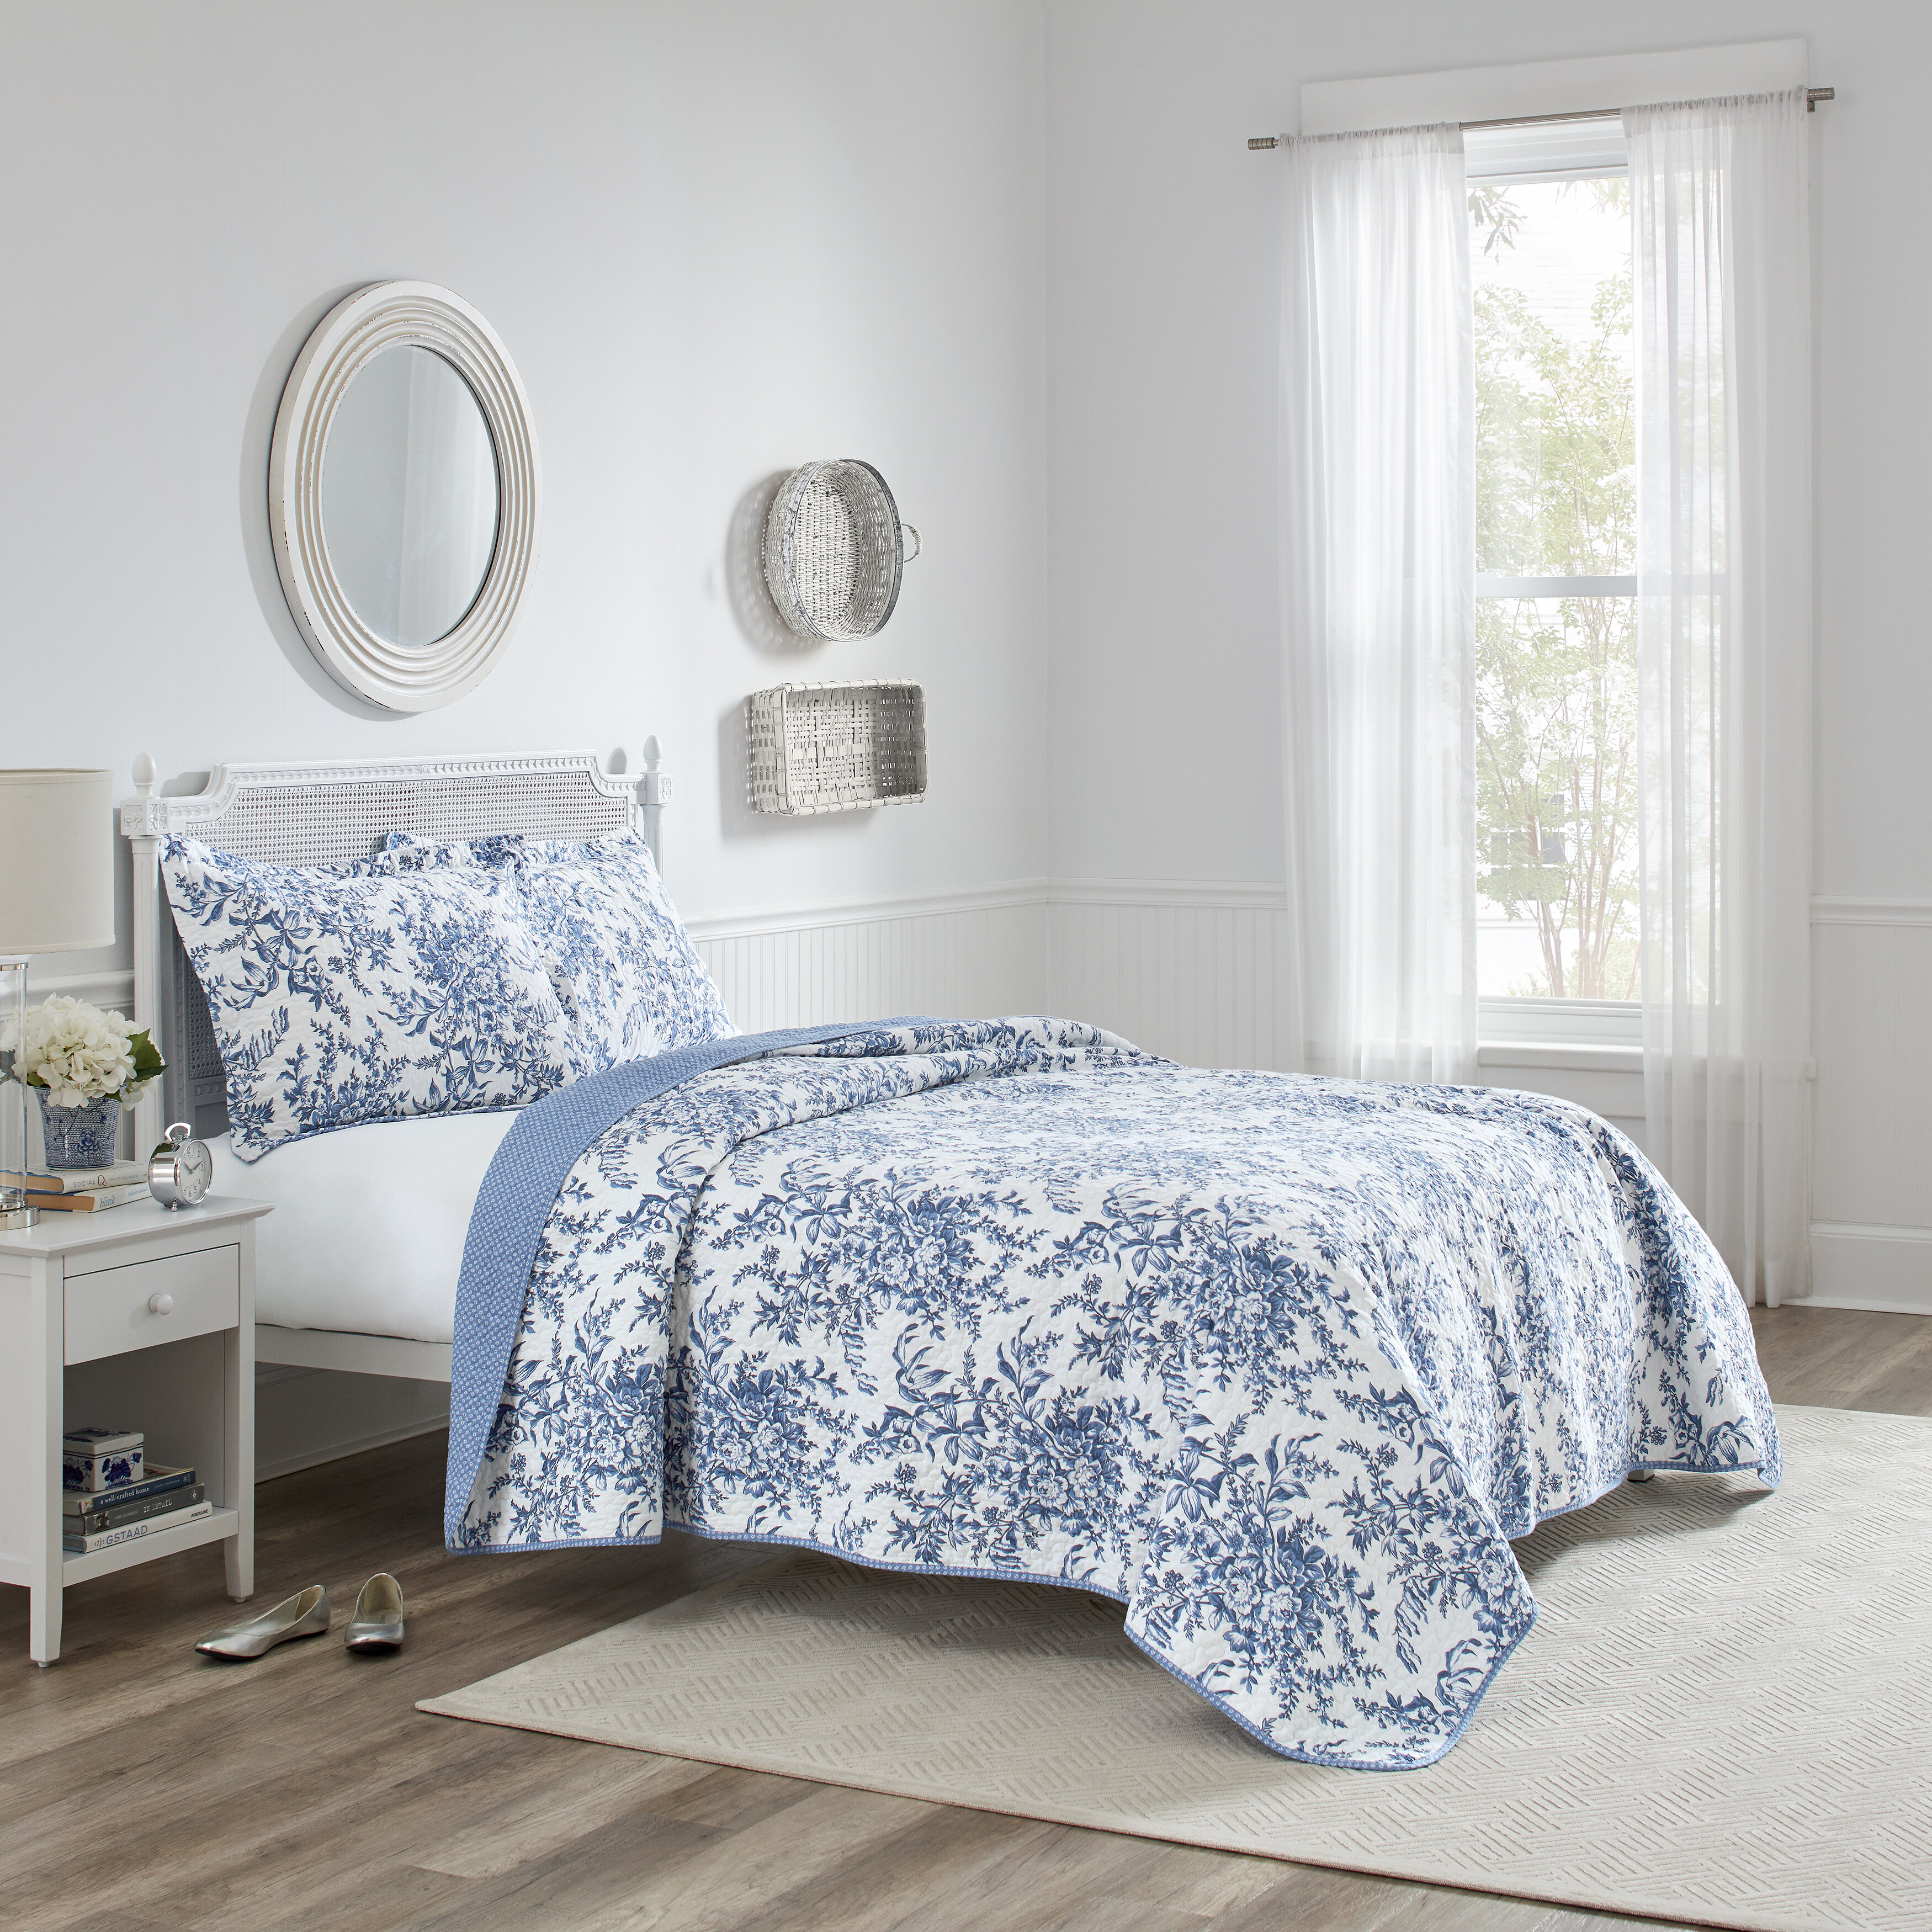 Laura Ashley King Size Quilt Set Cotton Reversible Bedding with Matching  Shams, Ideal for All Seasons & Pre-Washed for Added Softness, Breeze Blue